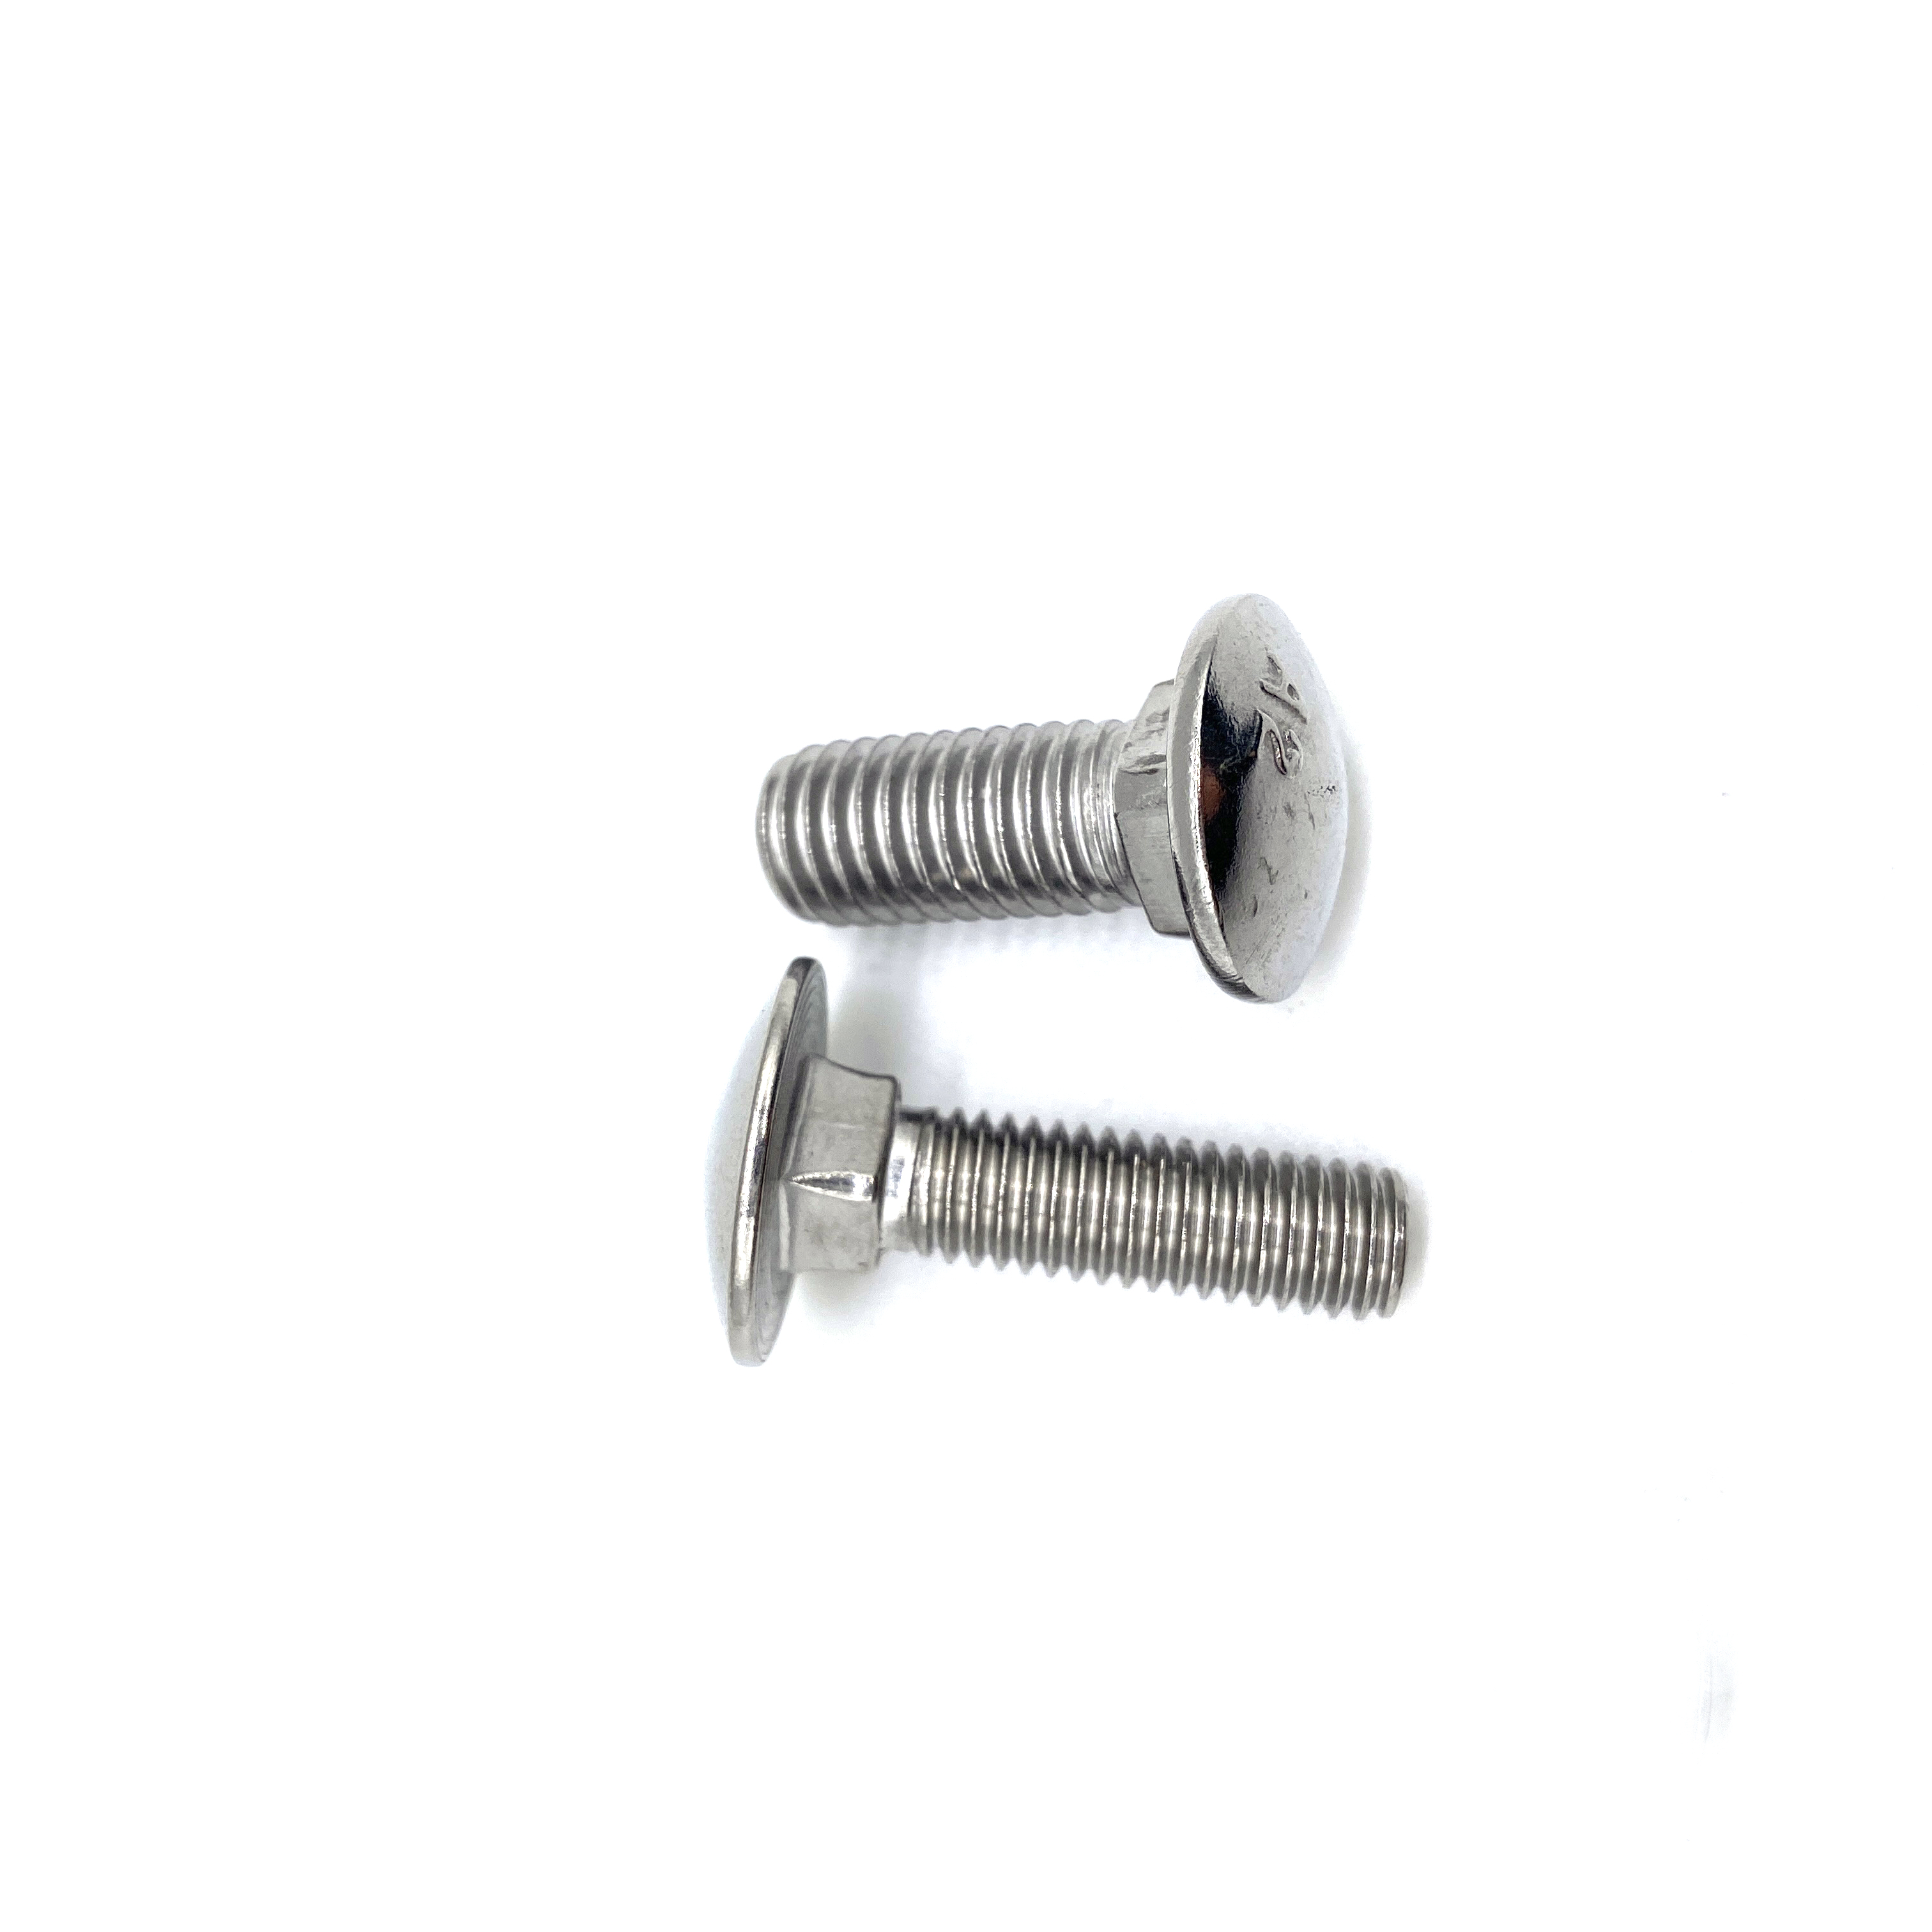 DIN603 M8 Round Mushroom Head Square Neck Stainless Steel Carriage Bolt Coach Bolt